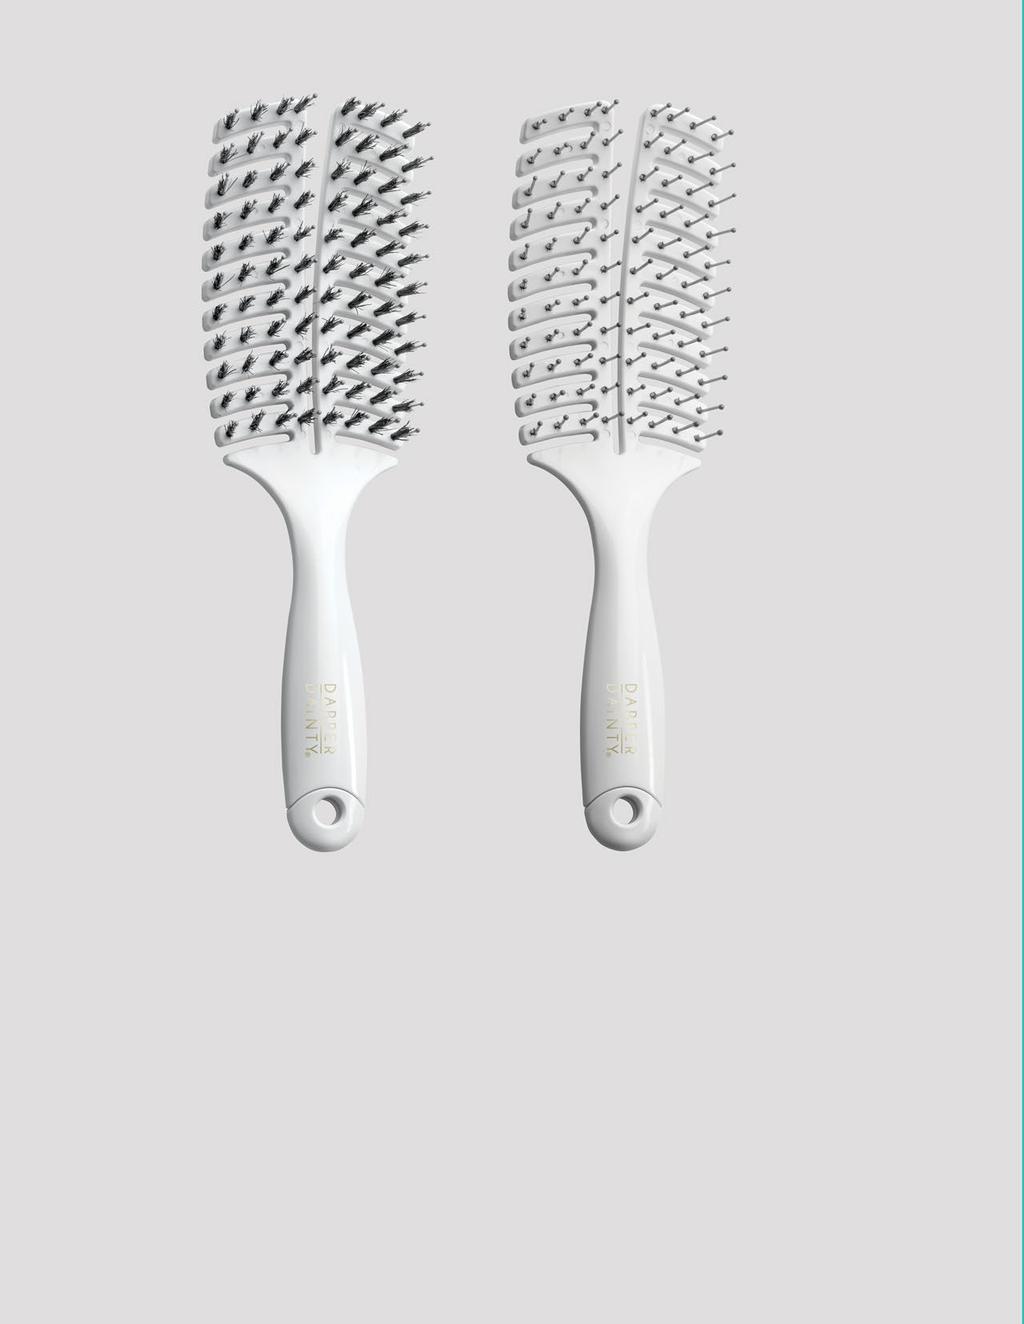 SUPER FLEXIBLE SUPER FLEXIBLE #80014 Max-Flo Curved Vent Porcupine Boar Brush accelerates the blow drying process by allowing warm air to circulate directly to the roots excellent grip & control